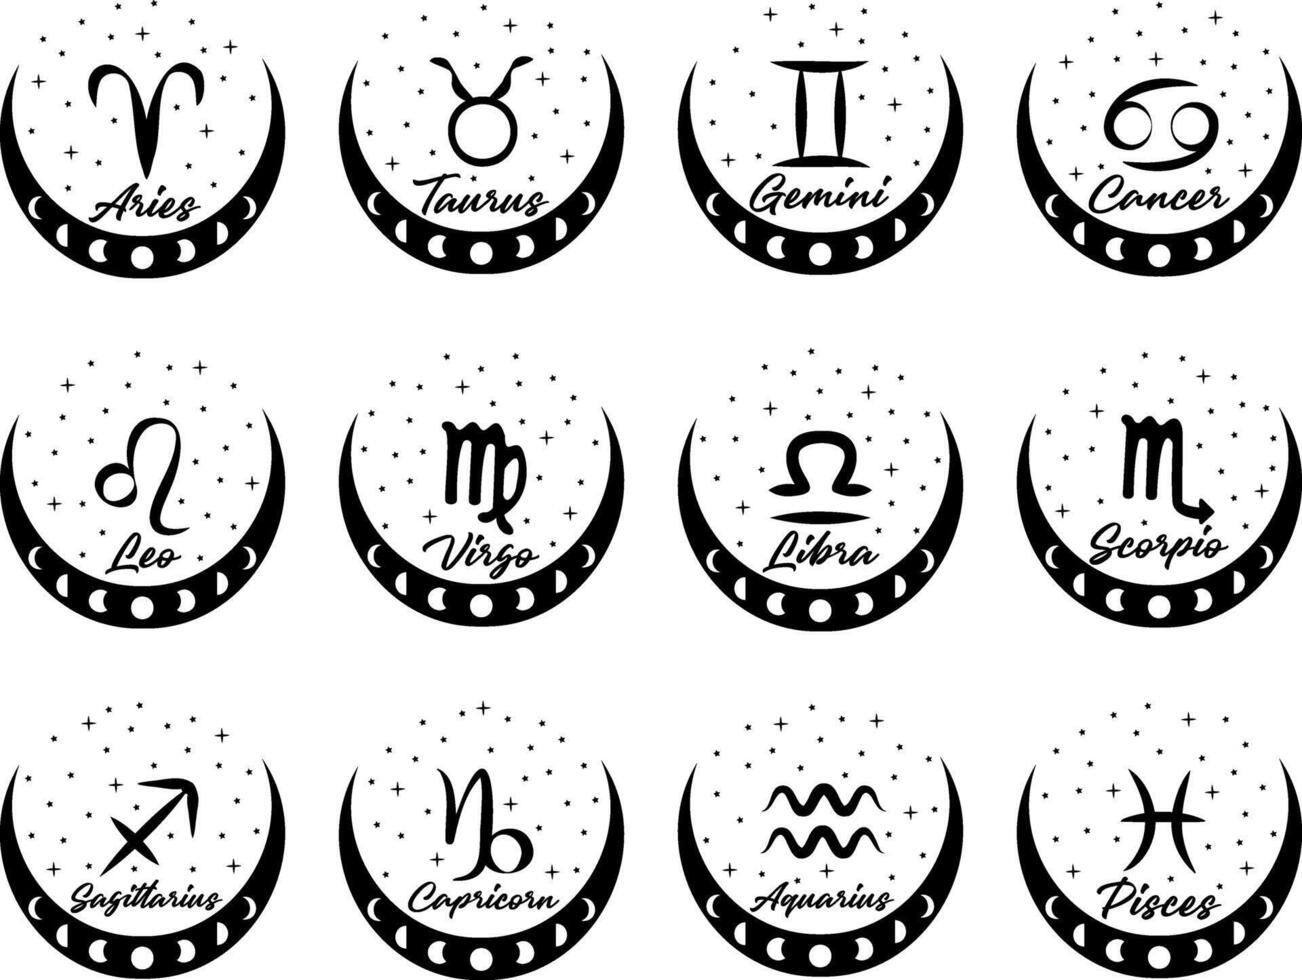 Galactic Zodiac Icons Collection. White Background Mystic Astrology Symbols. Esoteric Horoscope Illustrations. Cosmic Calendar Art with Moon Phases. Constellations Wall Art. illustration vector